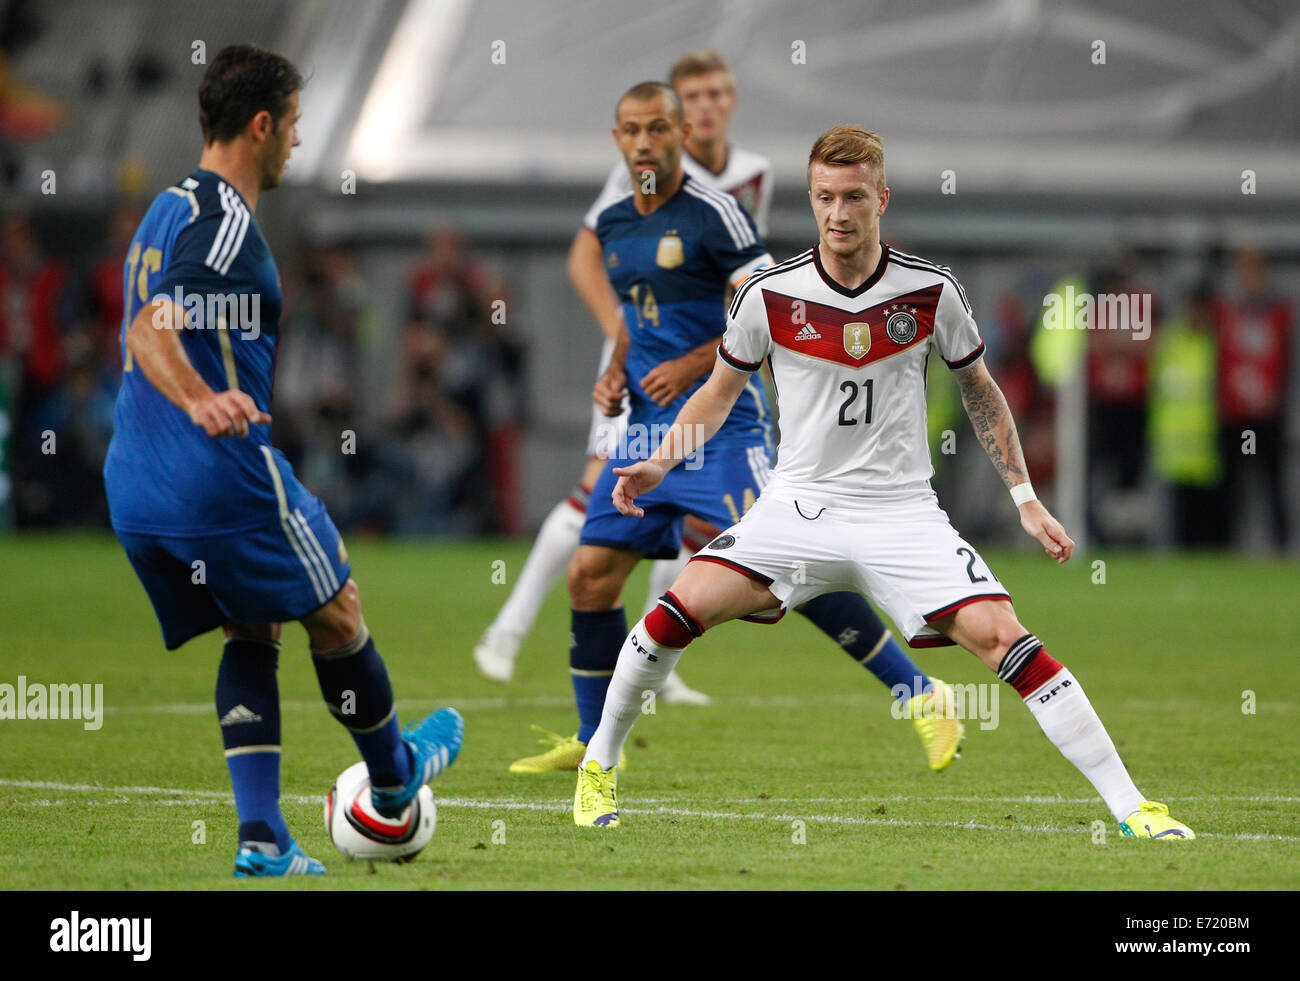 Duesseldorf, Germany. 03rd Sep, 2014. Germany's Marco Reus (R) and Argentina's Martin Demichelis vie for the ball during international soccer match between Germany and Argentina at Esprit arena in Duesseldorf, Germany, 03 September 2014. Photo: Roland Weihrauch/dpa/Alamy Live News Stock Photo